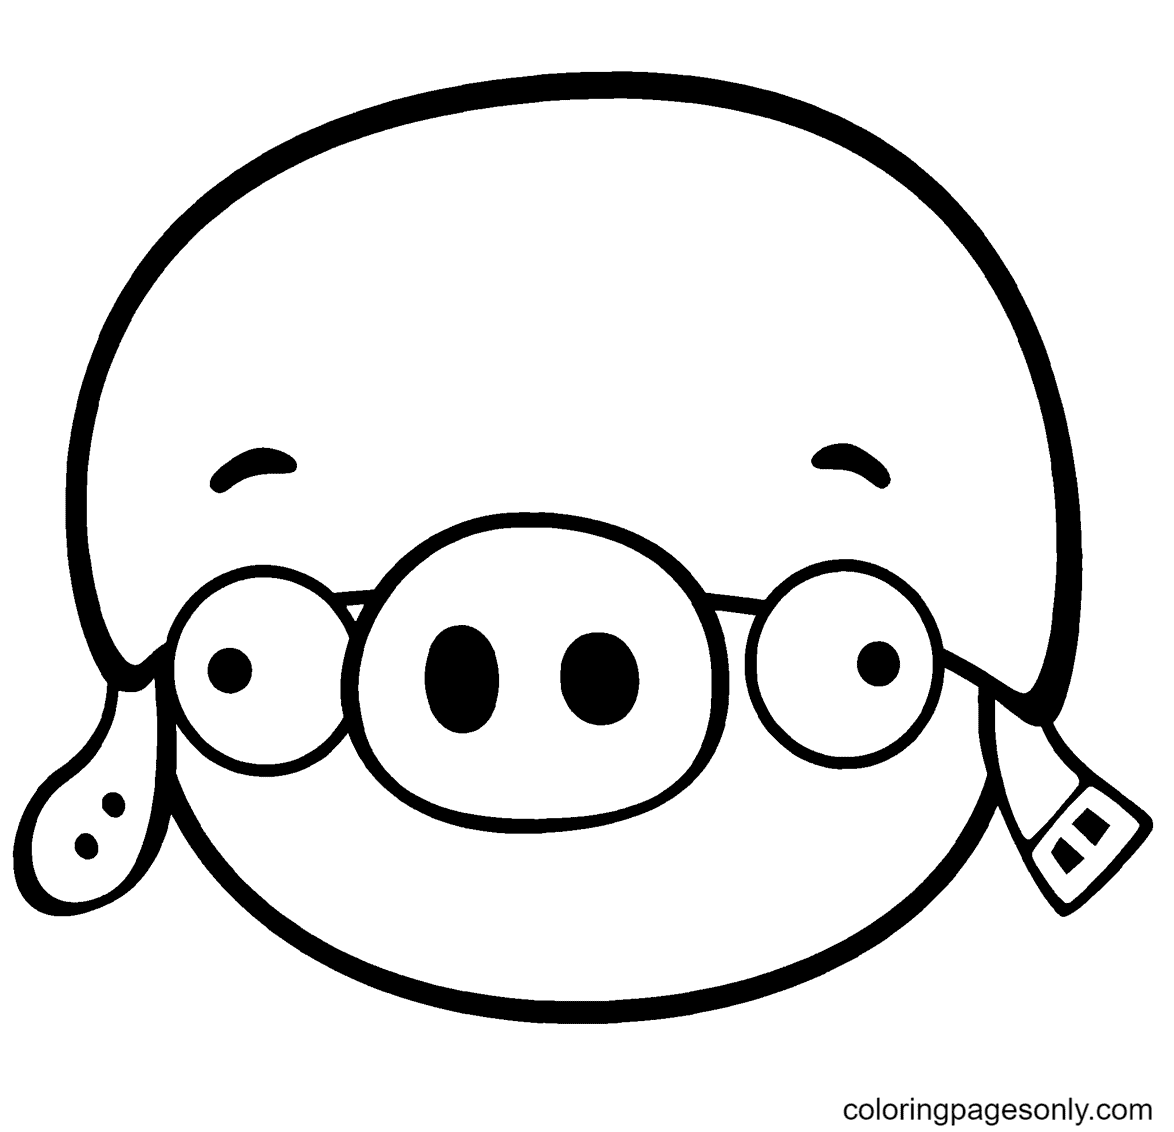 Corporal Pig Coloring Page